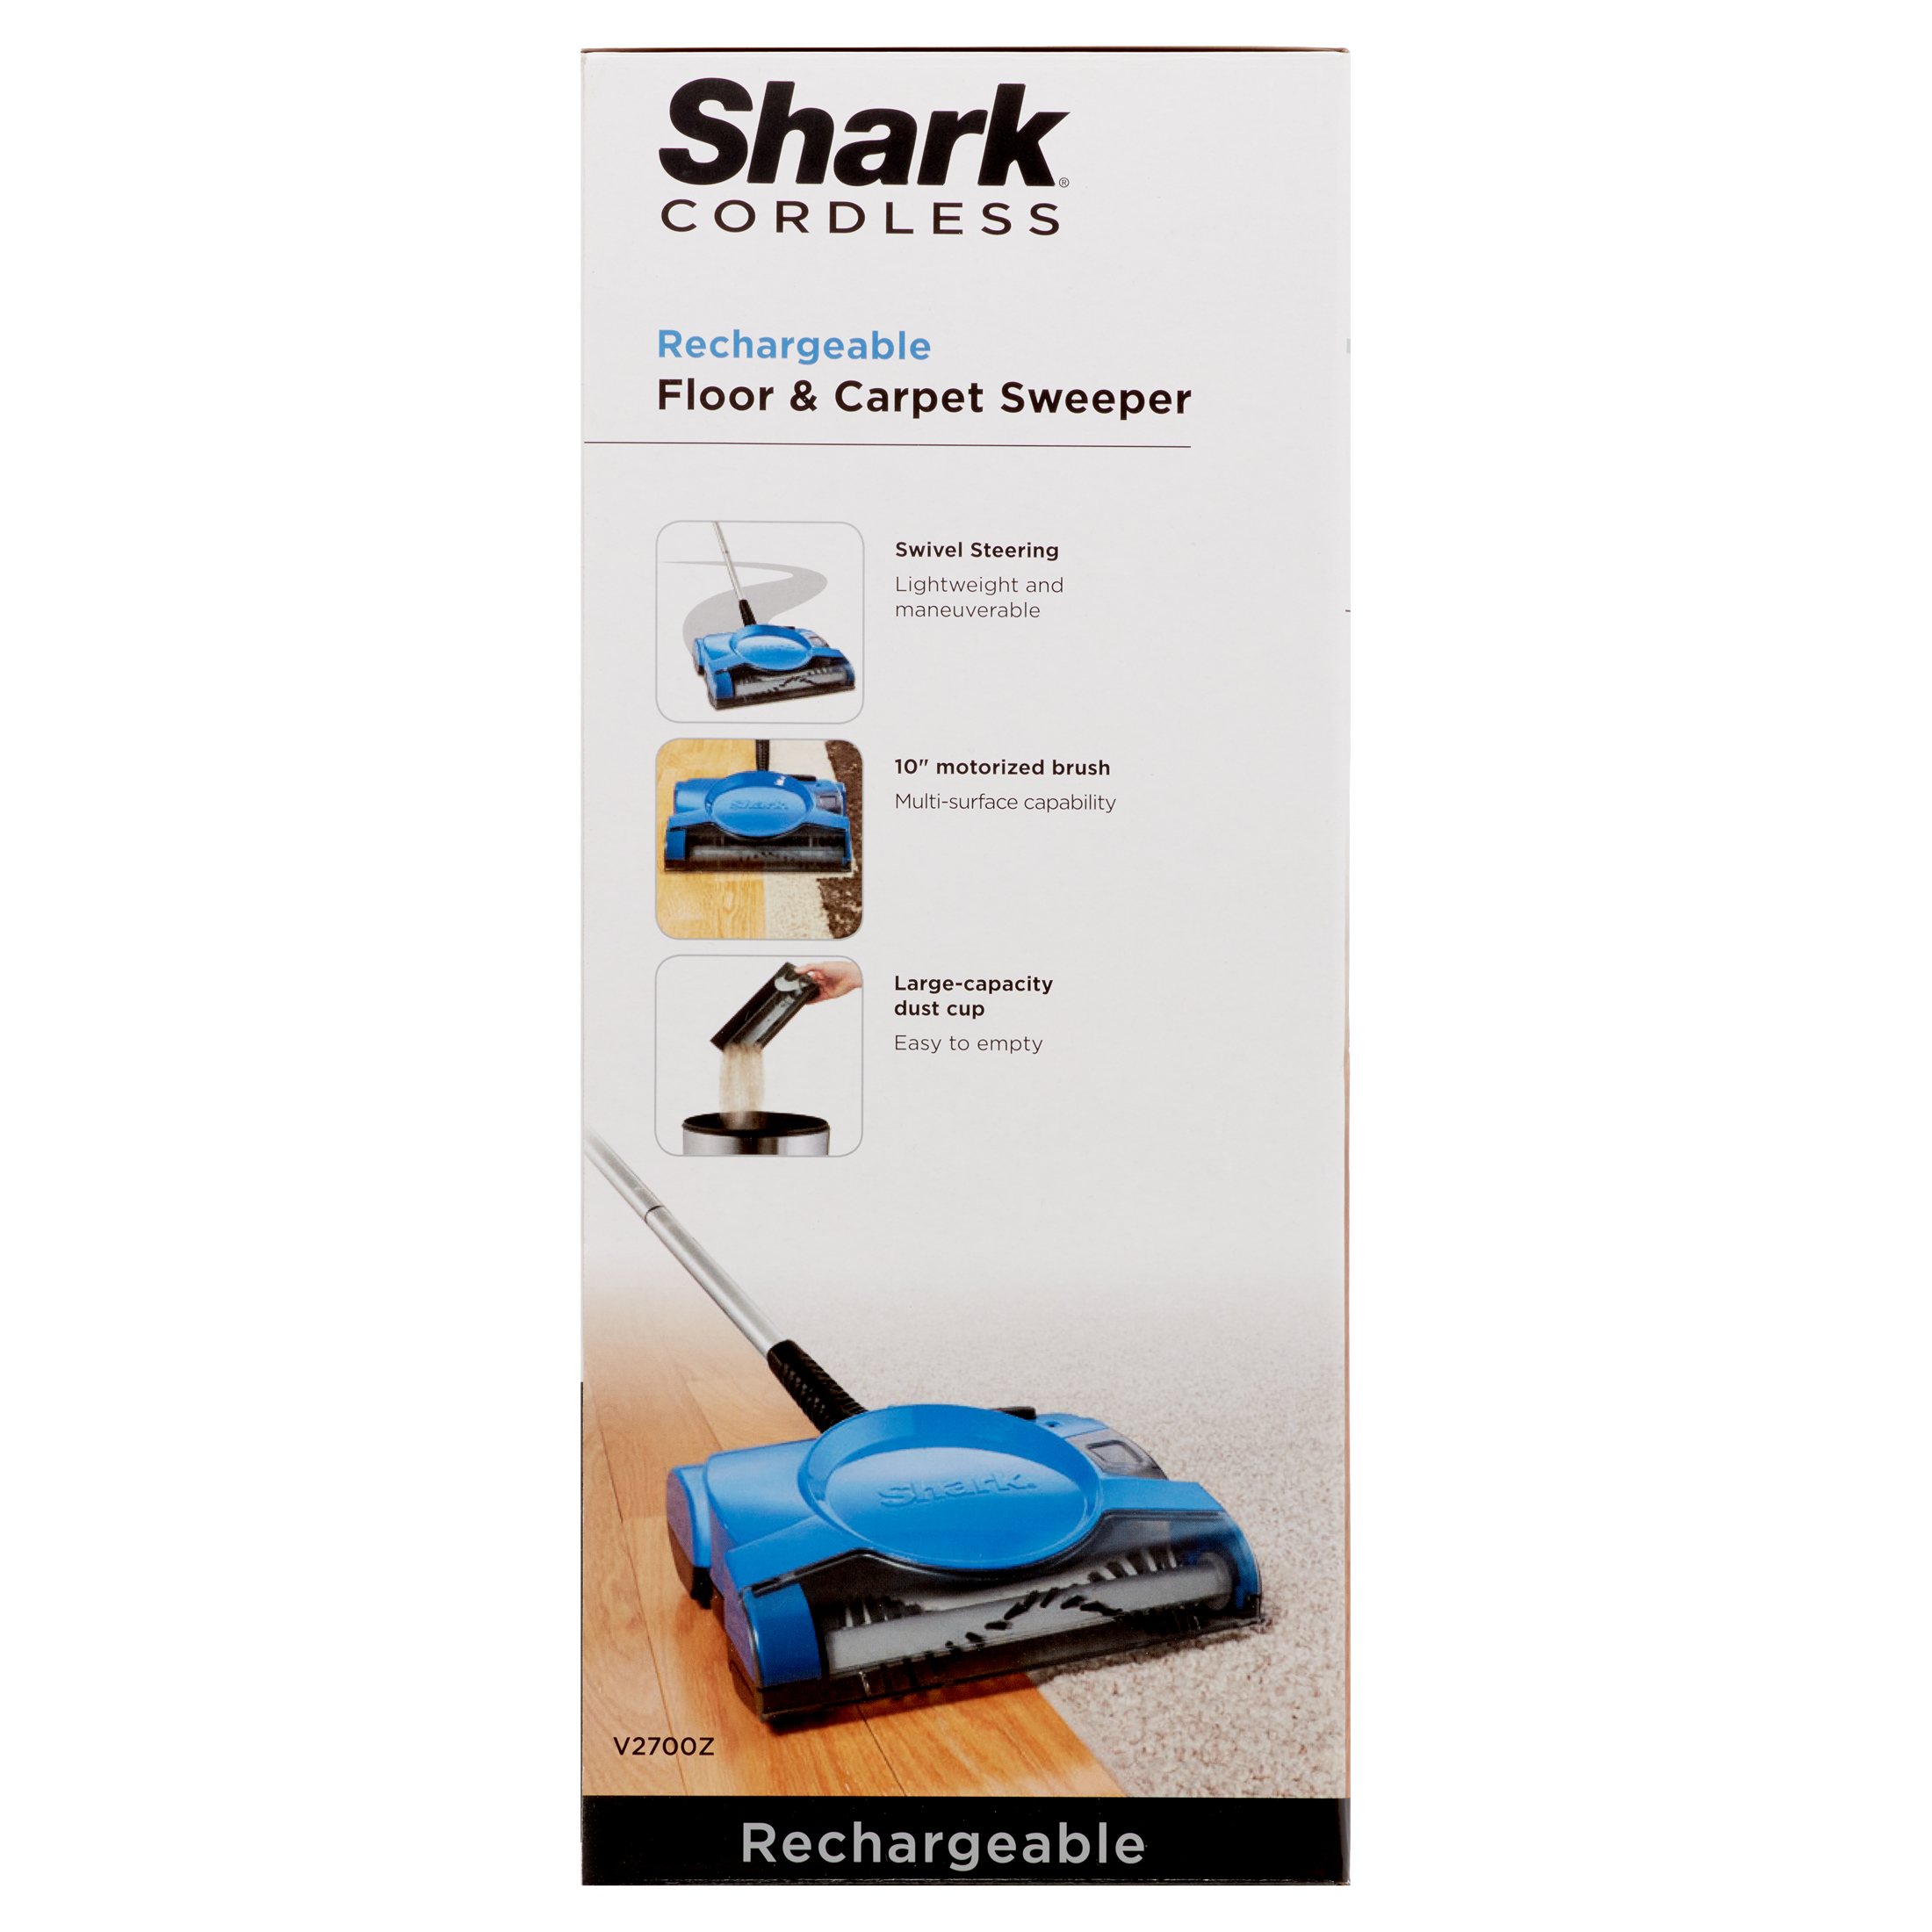 Shark V2700Z Lightweight 10 Inch Cordless Rechargeable Floor and Carpet Sweeper - image 5 of 10